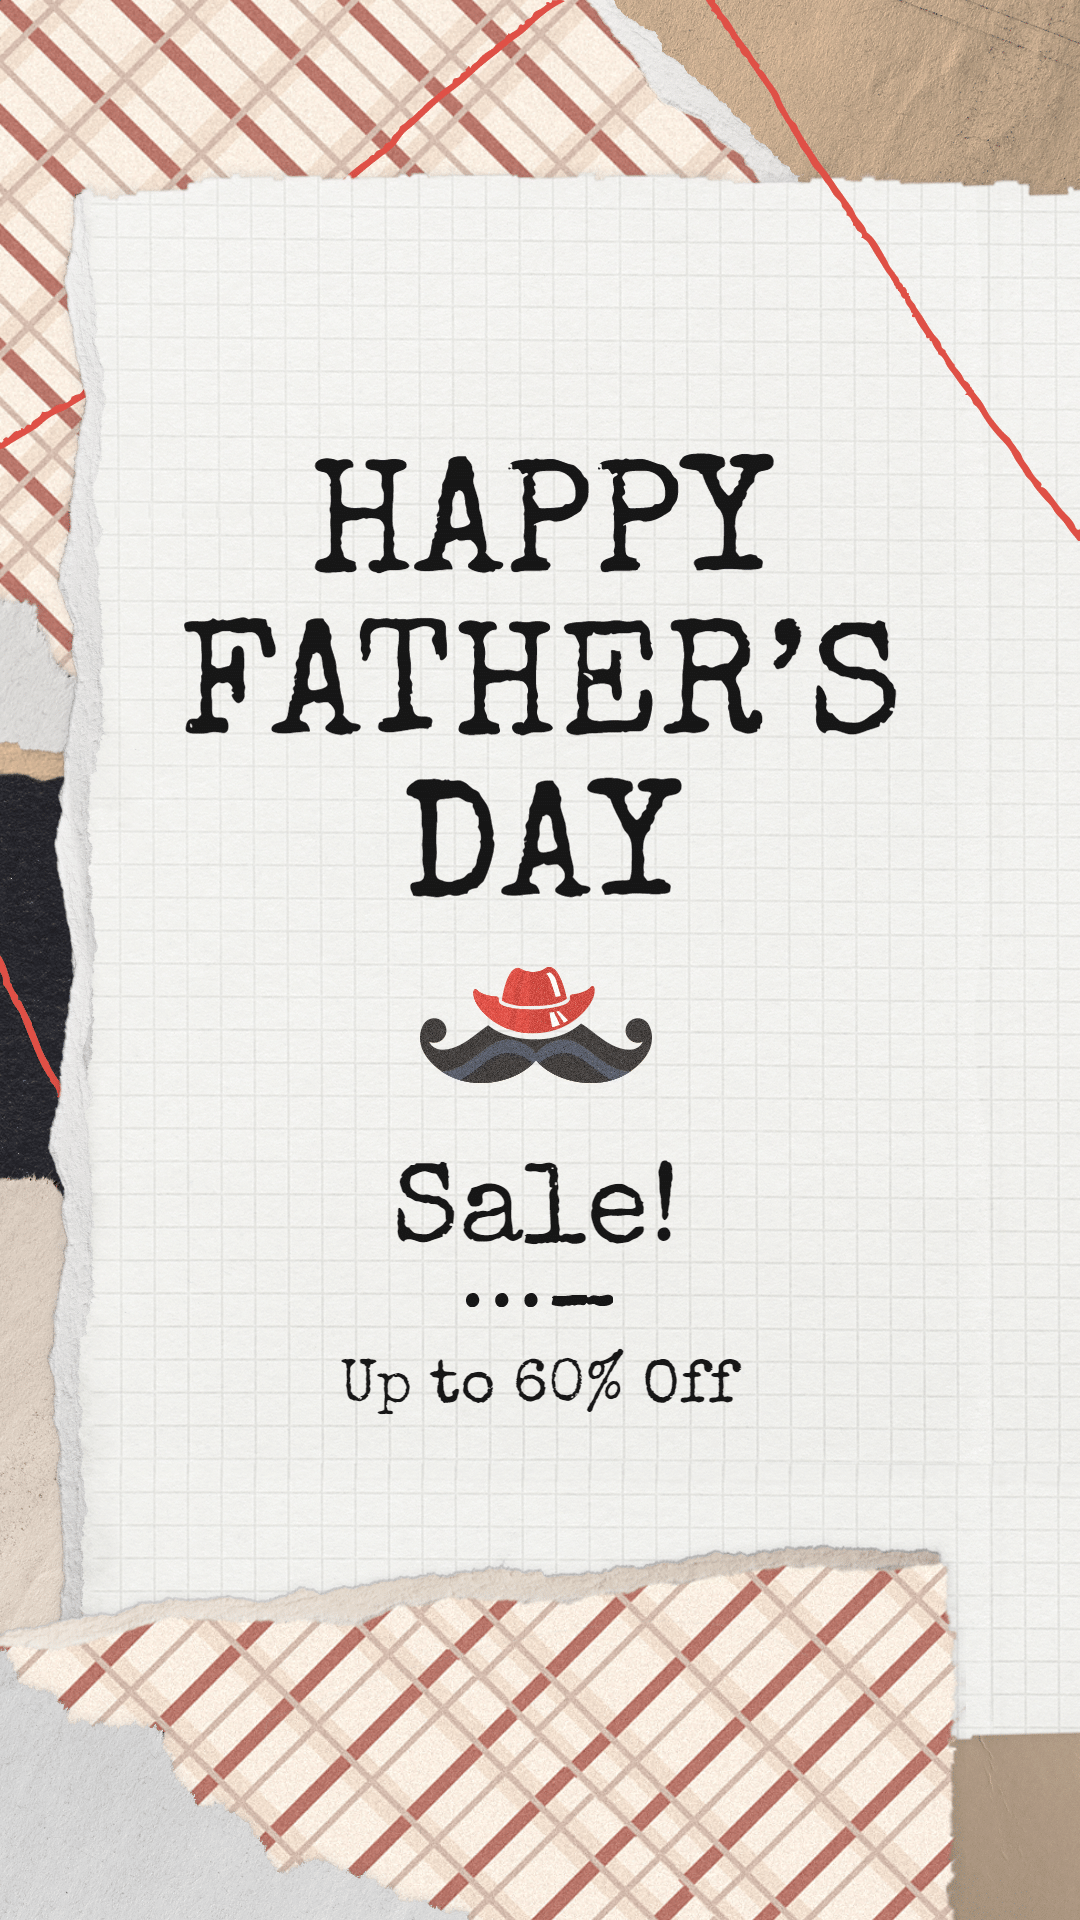 Handwritten Father's Day Festival Promotion Discount Ecommerce Story预览效果